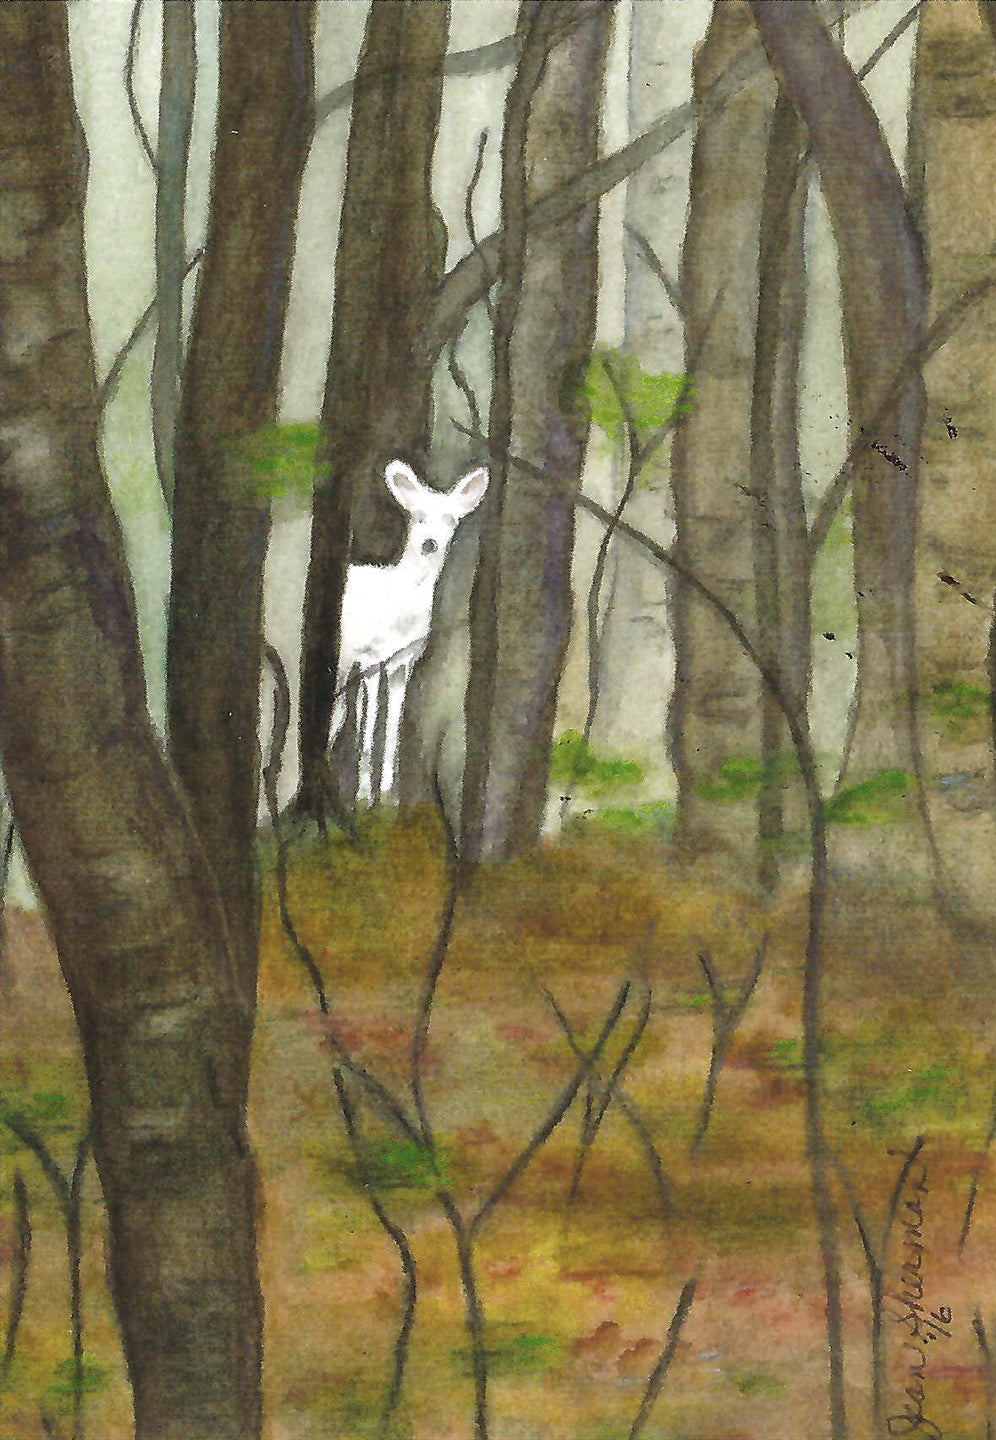 Postcard featuring a watercolor painting of the white deer in Kensington Metropark by the late Michigan artist Jean Sherman.